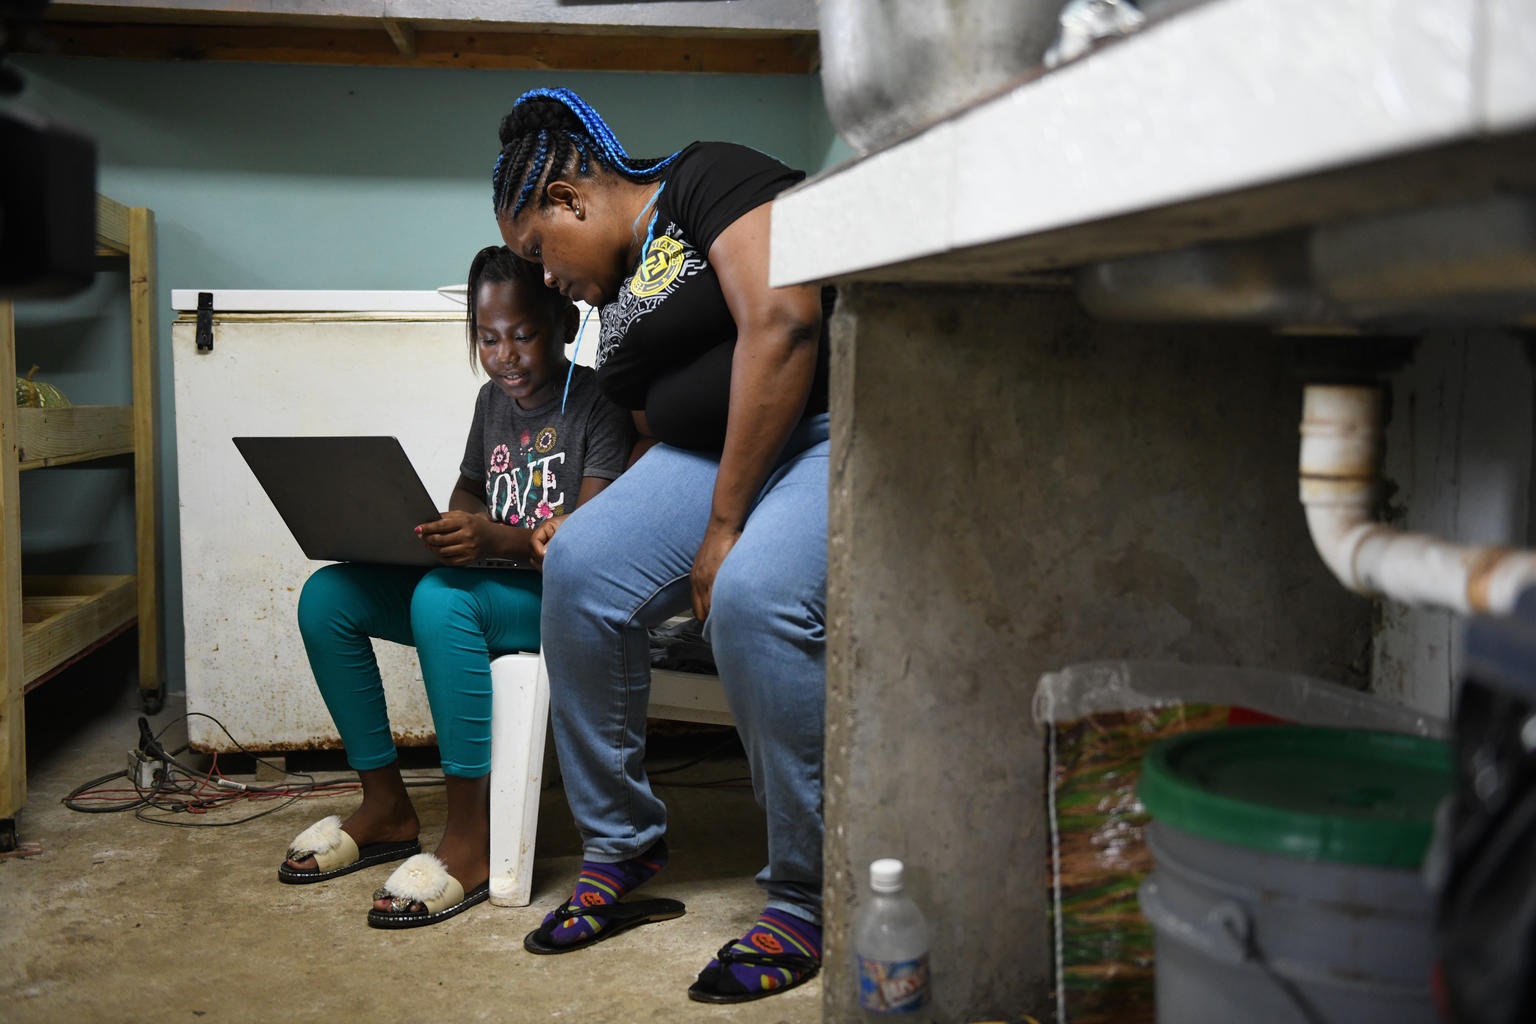 A child and her mother look at a computer in the Caribbean.